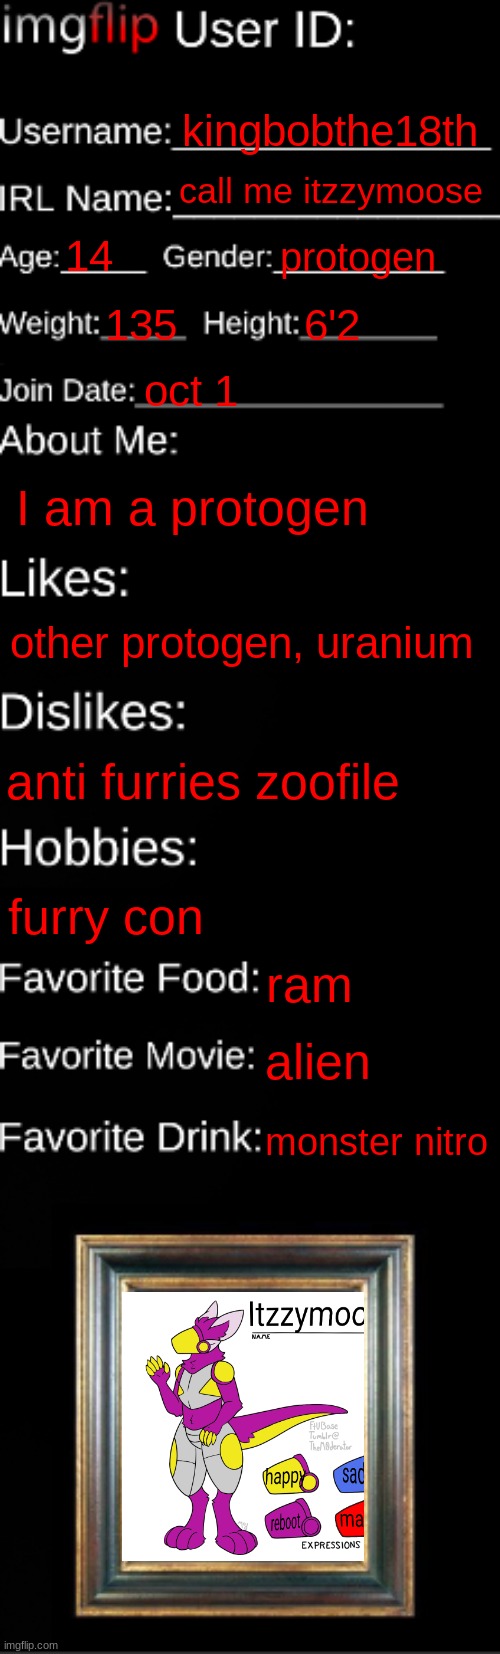 furry | kingbobthe18th; call me itzzymoose; 14; protogen; 135; 6'2; oct 1; I am a protogen; other protogen, uranium; anti furries zoofile; furry con; ram; alien; monster nitro | image tagged in imgflip id card | made w/ Imgflip meme maker